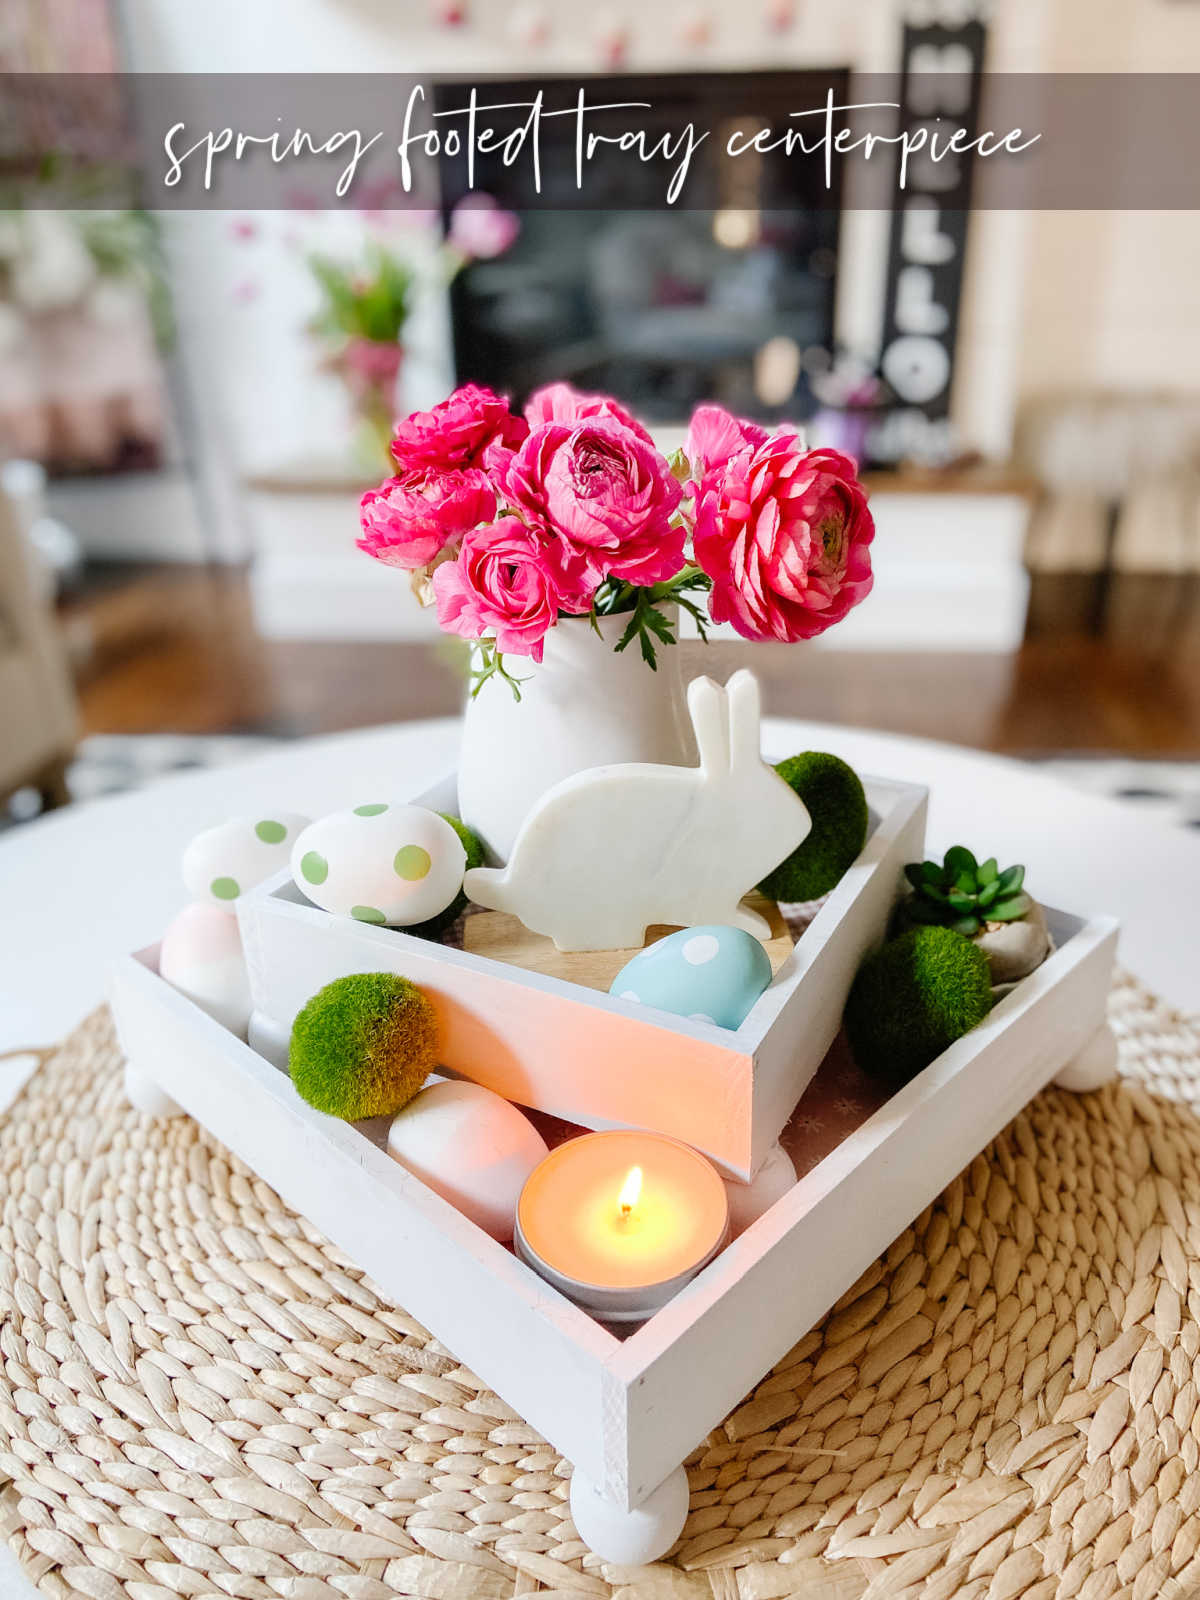 DIY Spring Footed Stacking Tray Centerpiece. Add ball feet to simple wood boxes, add scrapbook paper and layer with fresh flowers and spring items for a pretty centerpiece! 